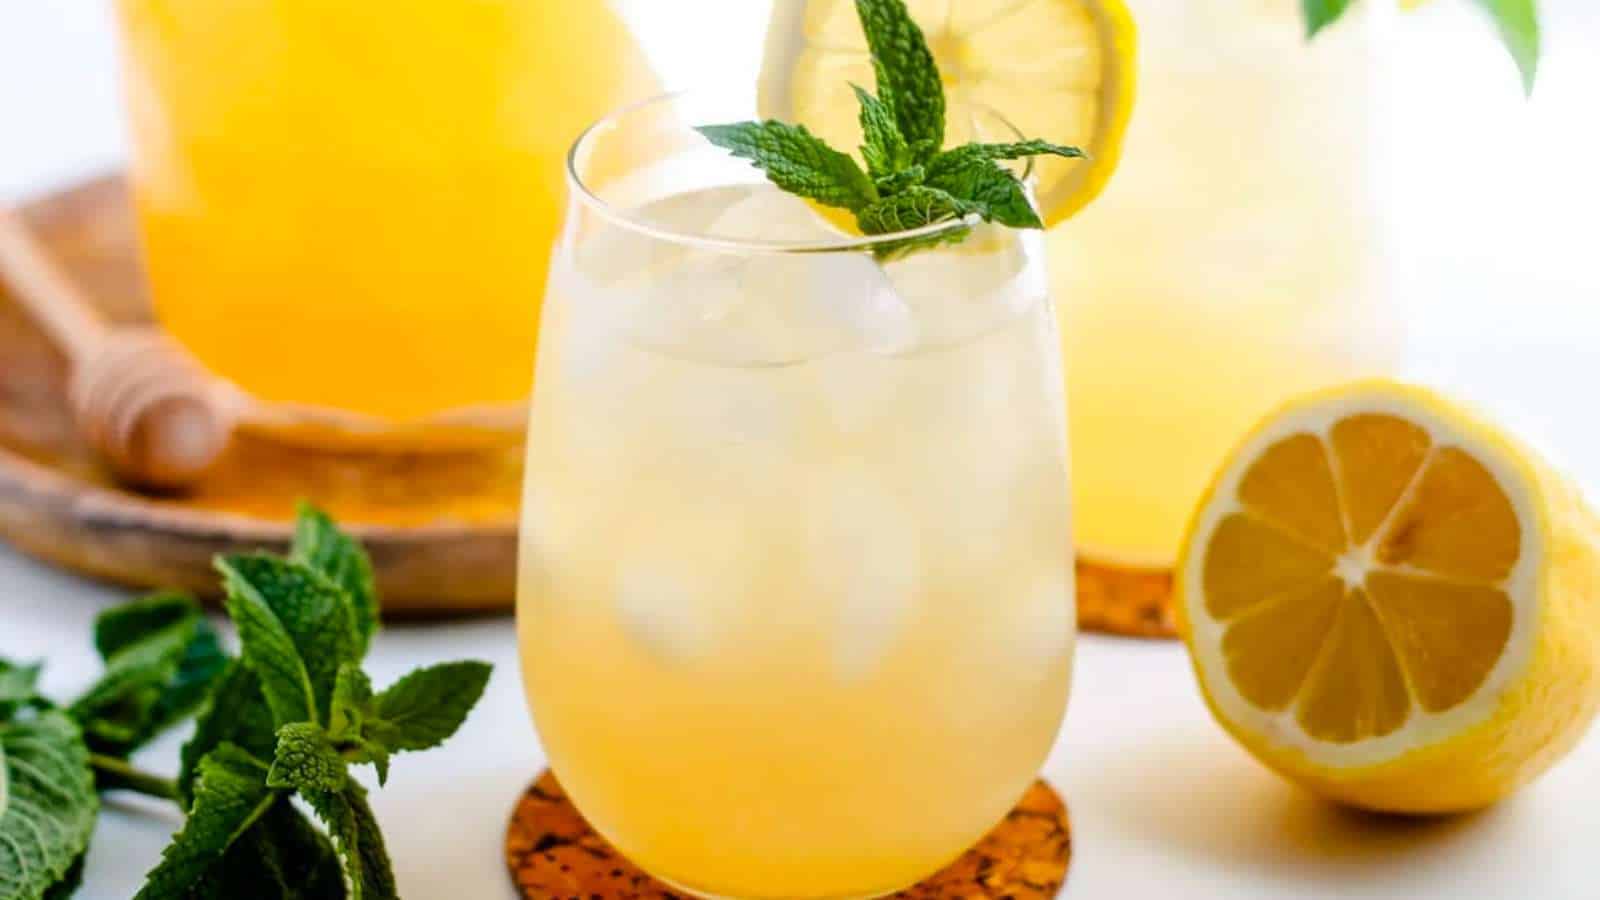 A glass of iced green tea garnished with fresh mint.